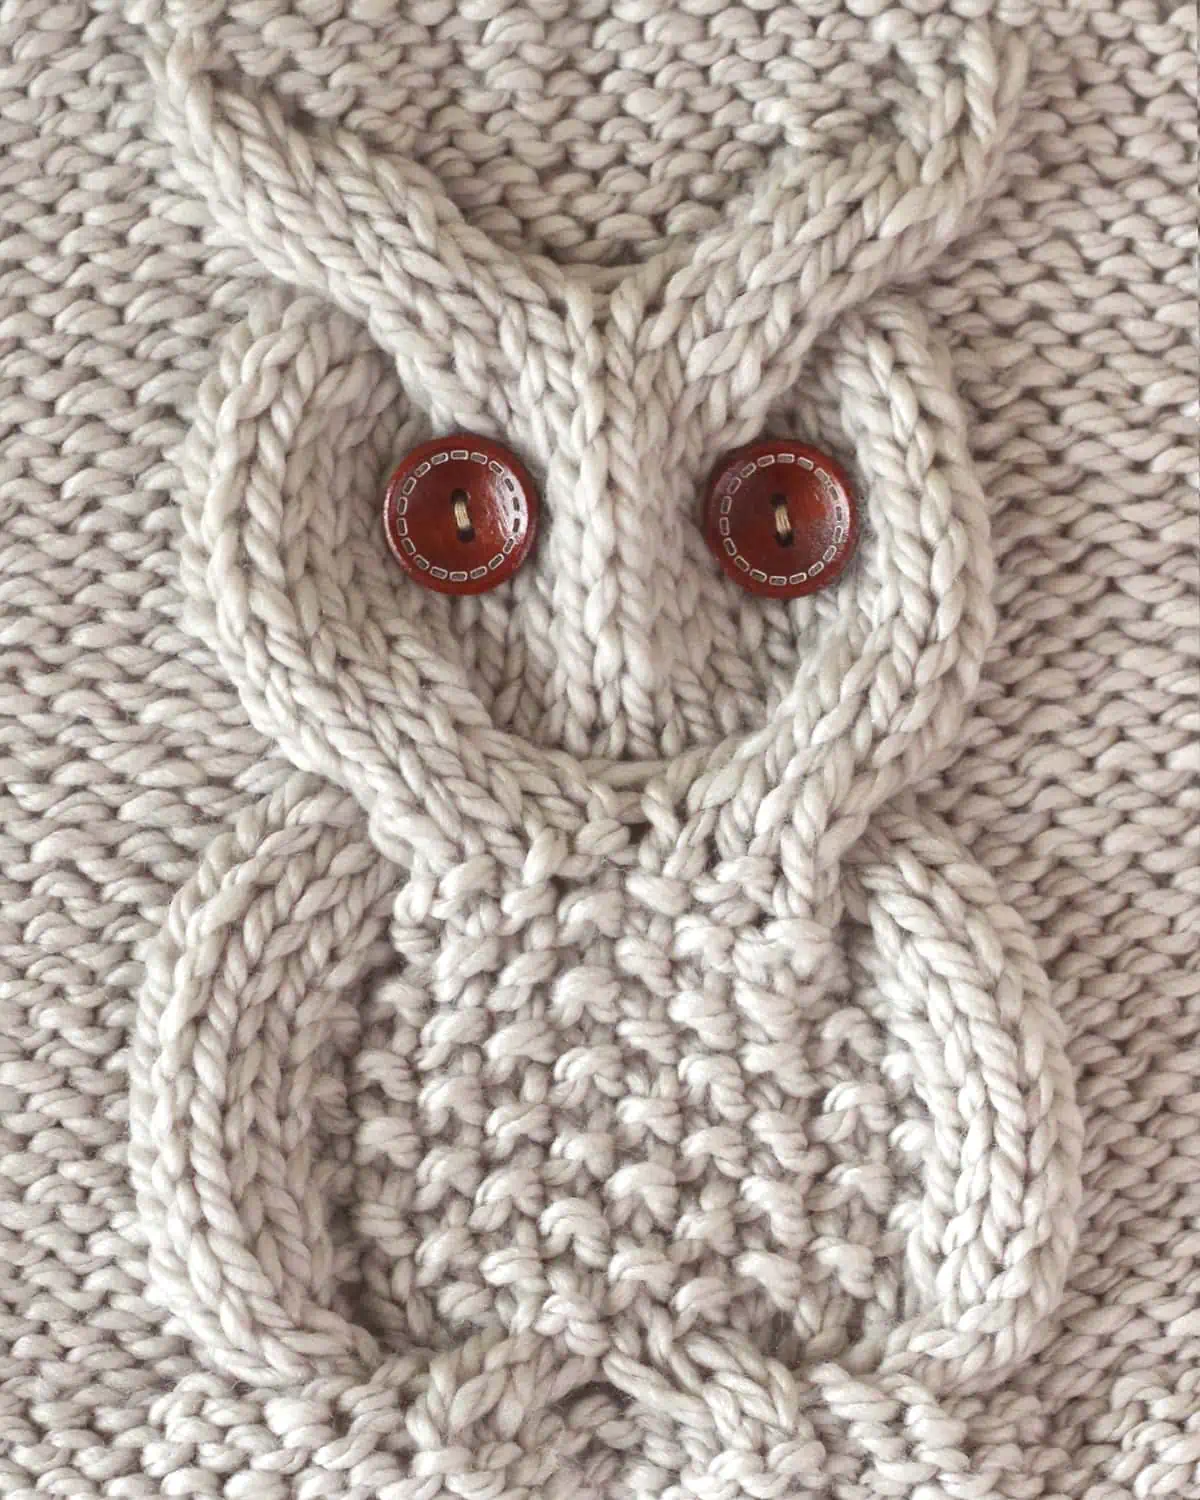 Owl Cable Stitch Square in beige yarn color with brown button eyes.